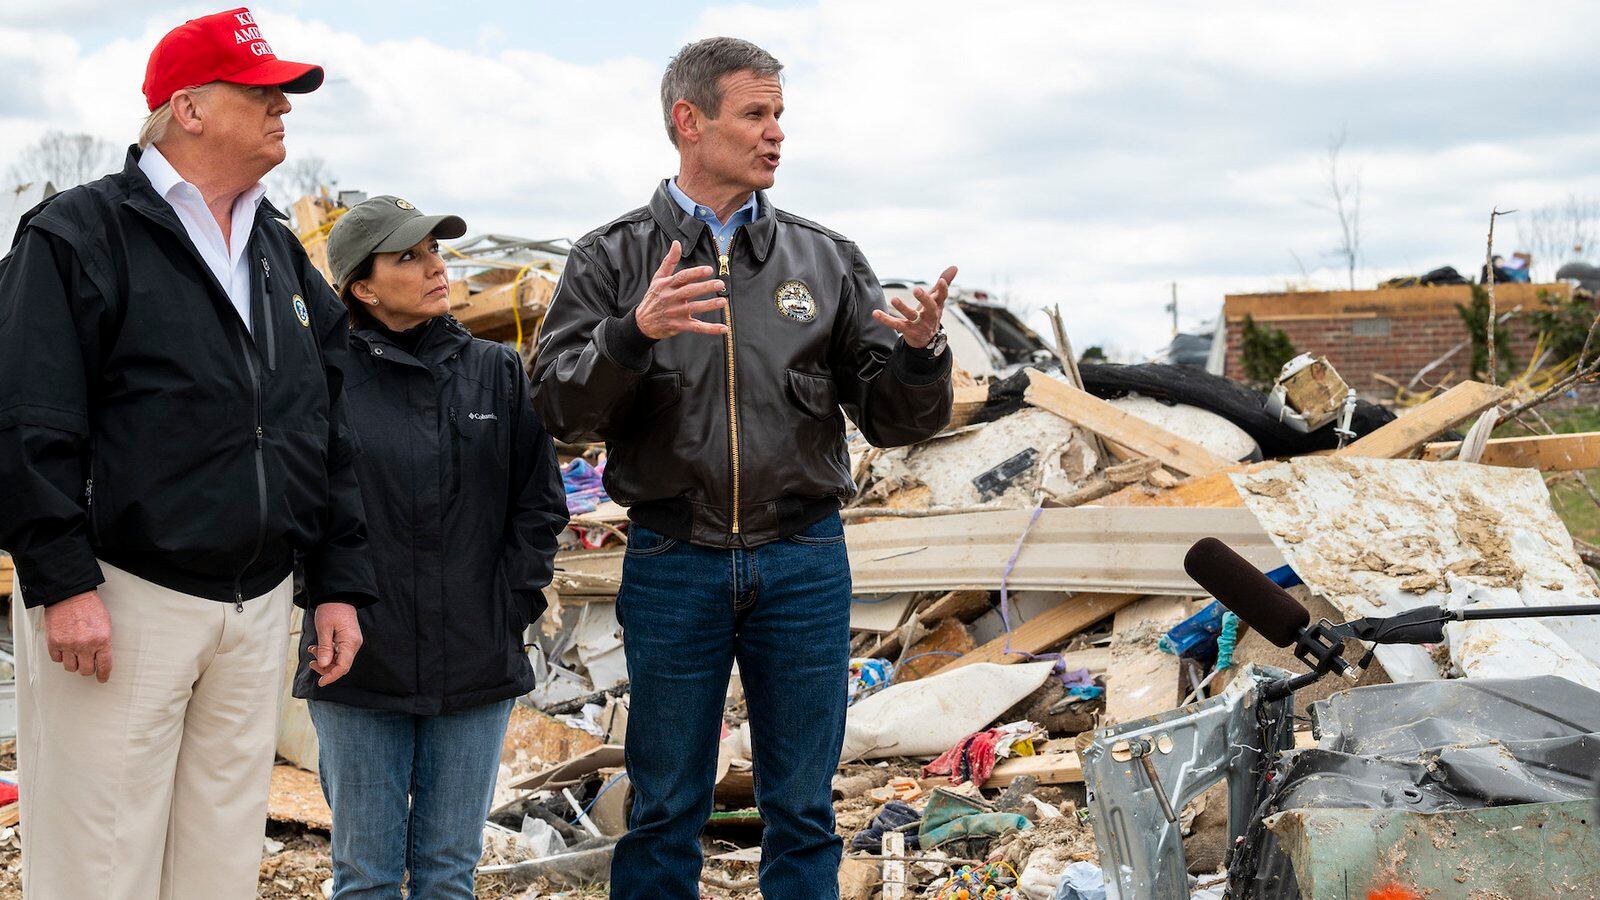 Gov. Bill Lee and his wife, Maria, join President Donald Trump on a March 6 tour of damage caused when tornadoes thrashed parts of Middle Tennessee on March 4.